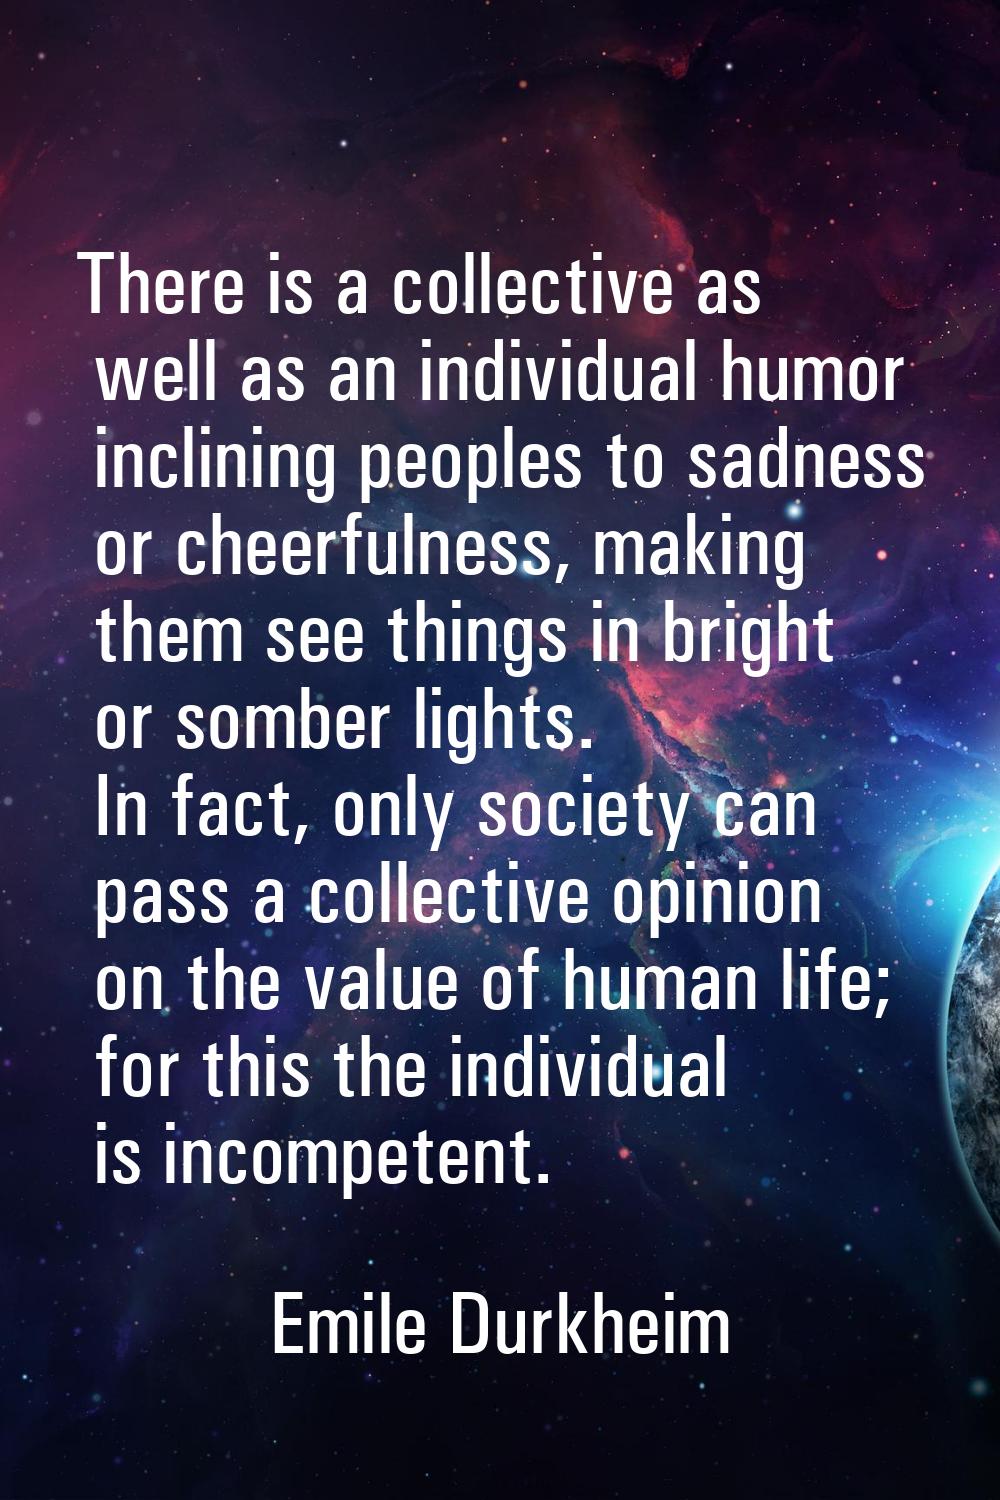 There is a collective as well as an individual humor inclining peoples to sadness or cheerfulness, 